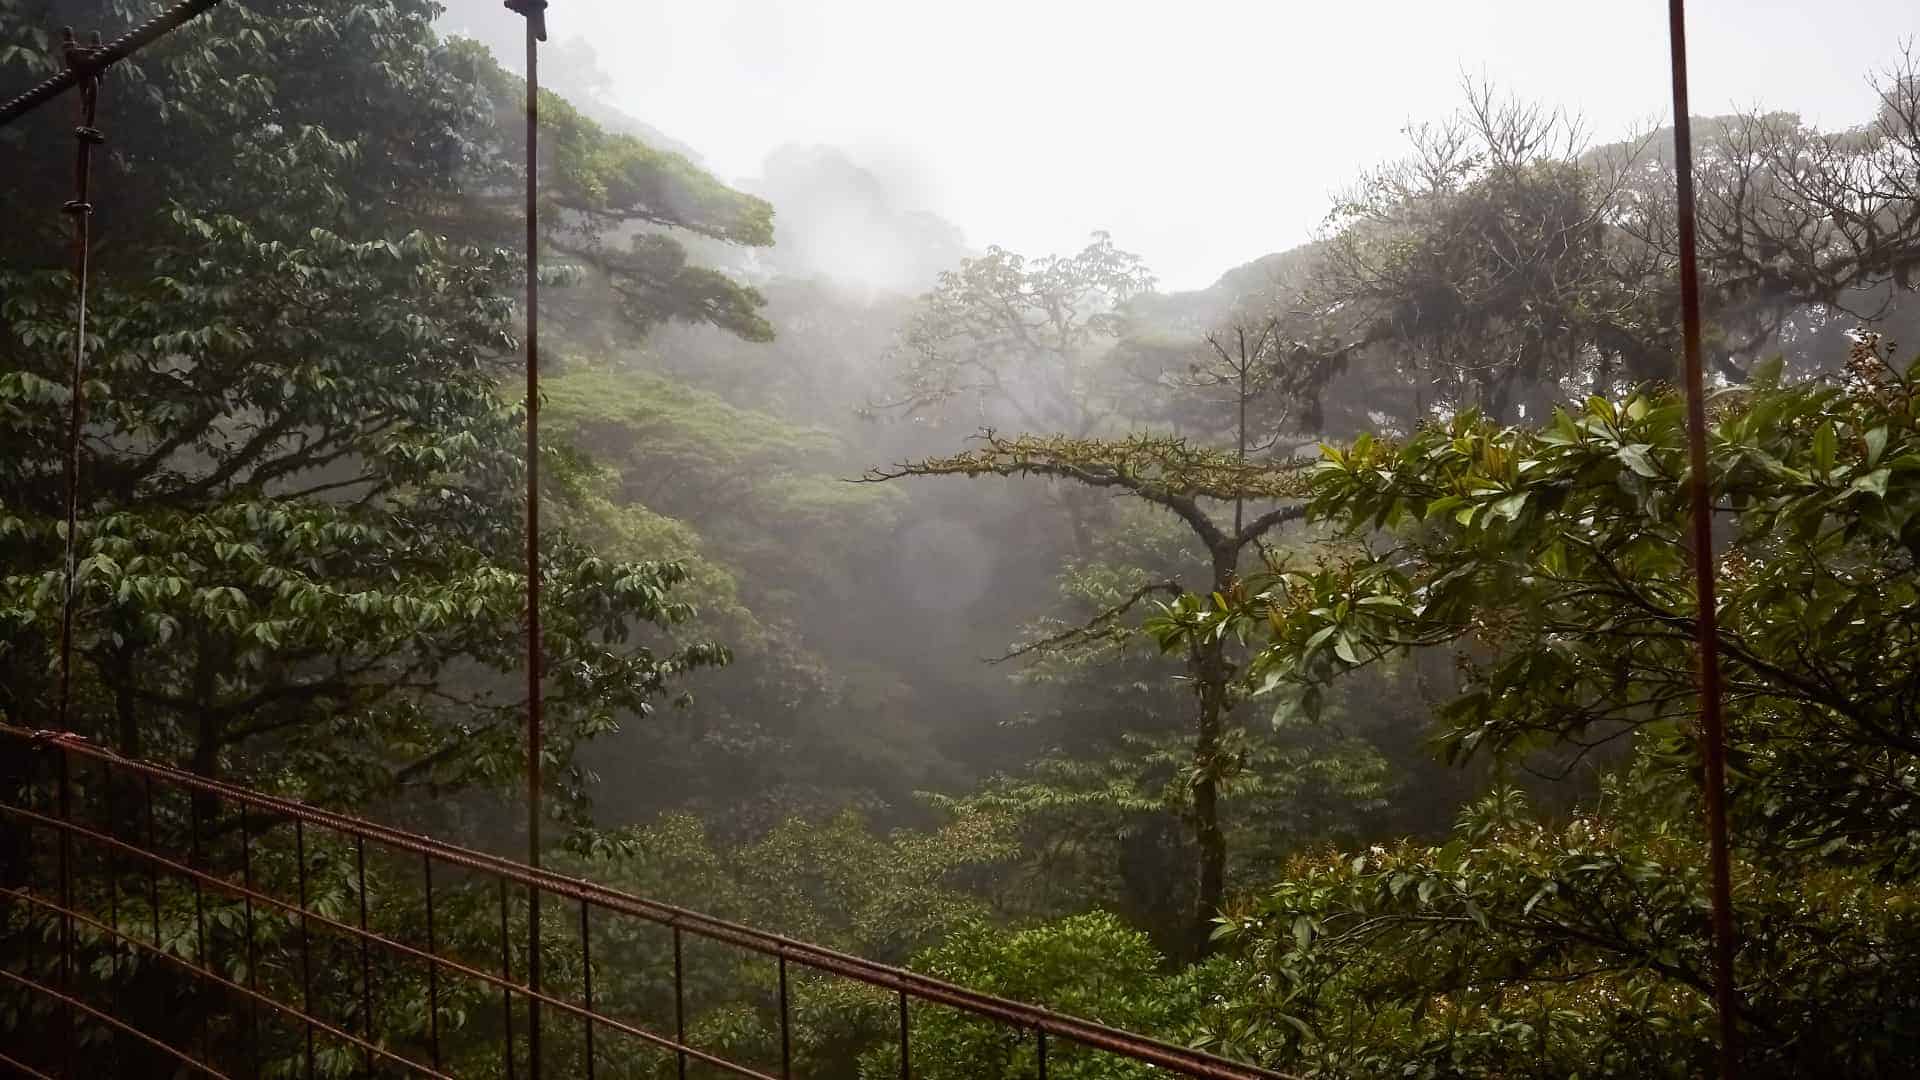 A misty view of a lush, green tropical forest with various trees and plants. The image is taken from a suspension bridge with metal cables and railings, partially visible on the sides. The forest is enveloped in fog, giving it a serene and mysterious atmosphere.